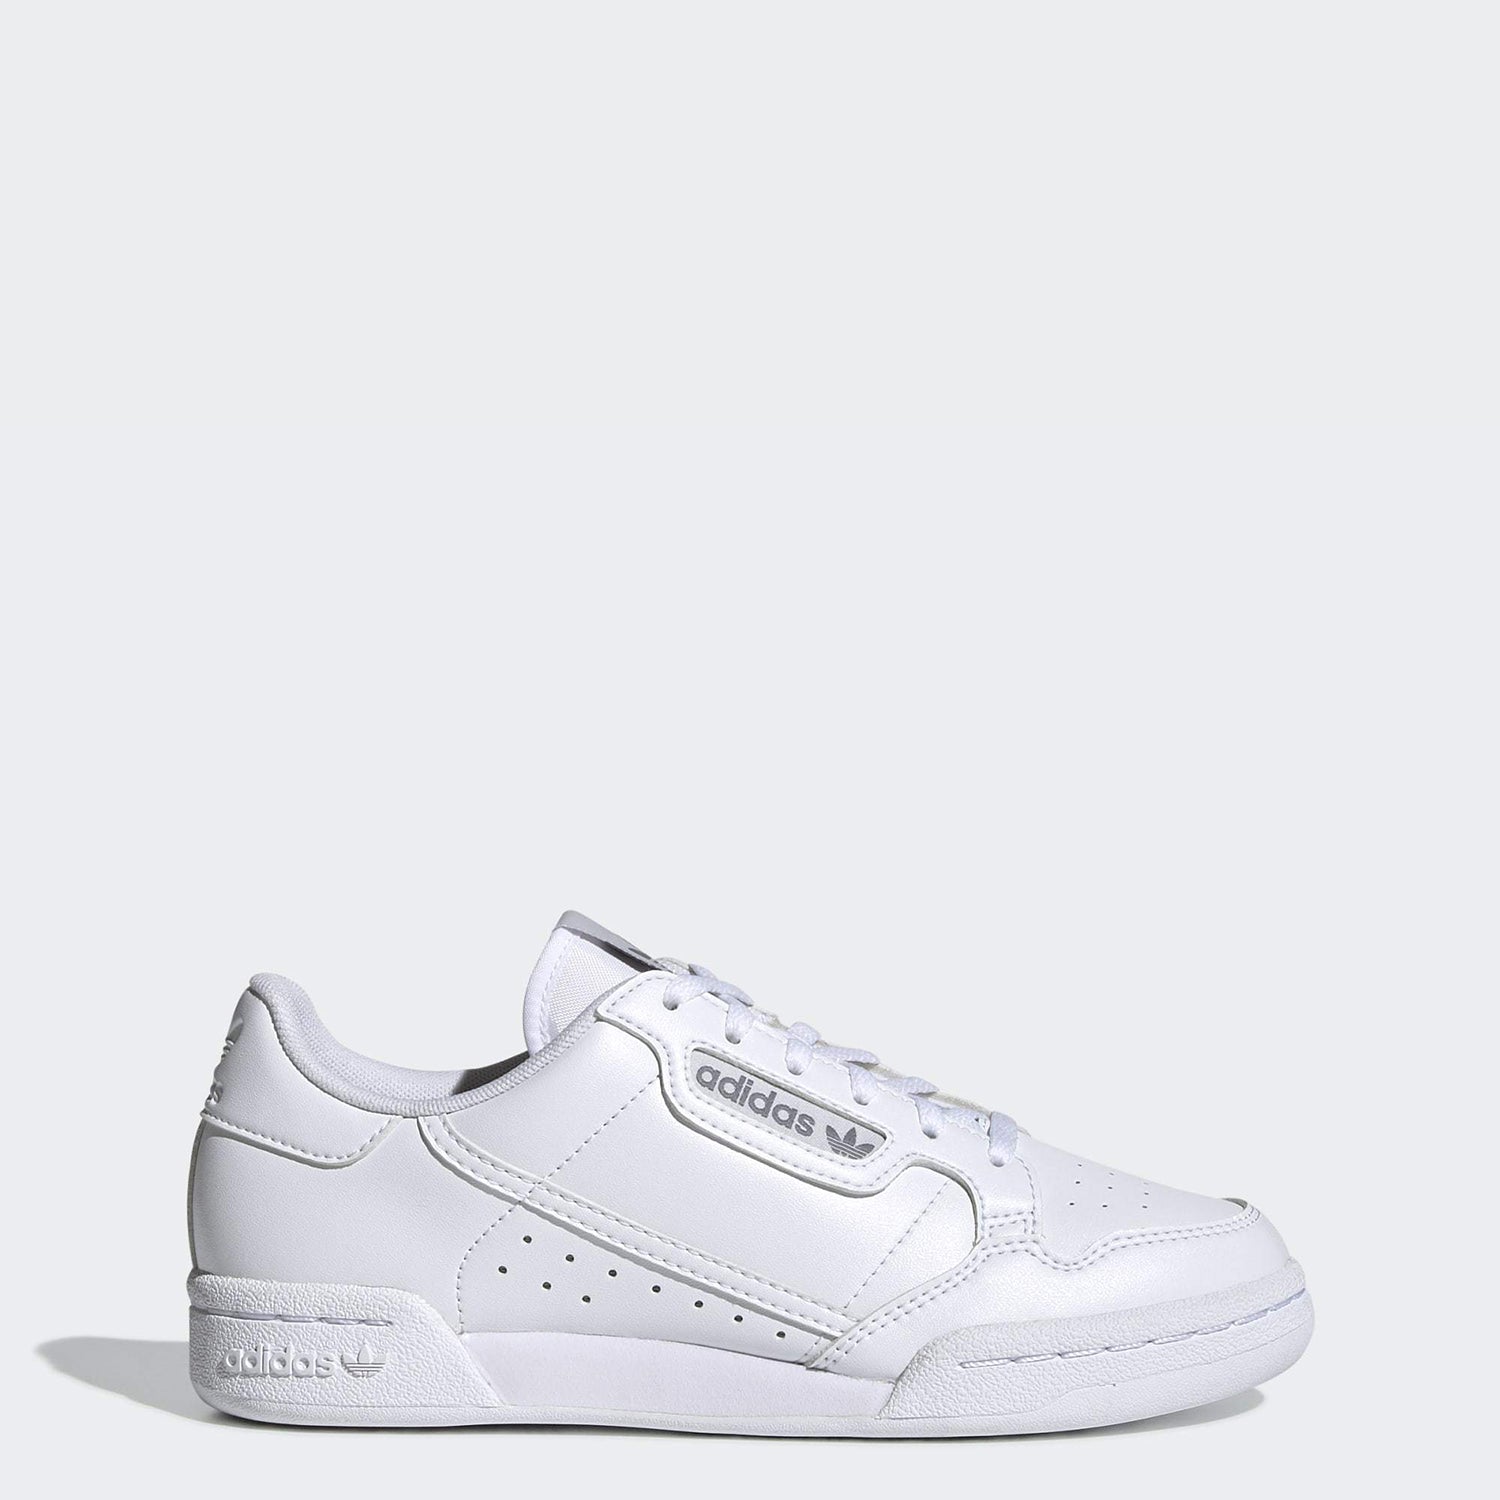 adidas continental 8 white and grey